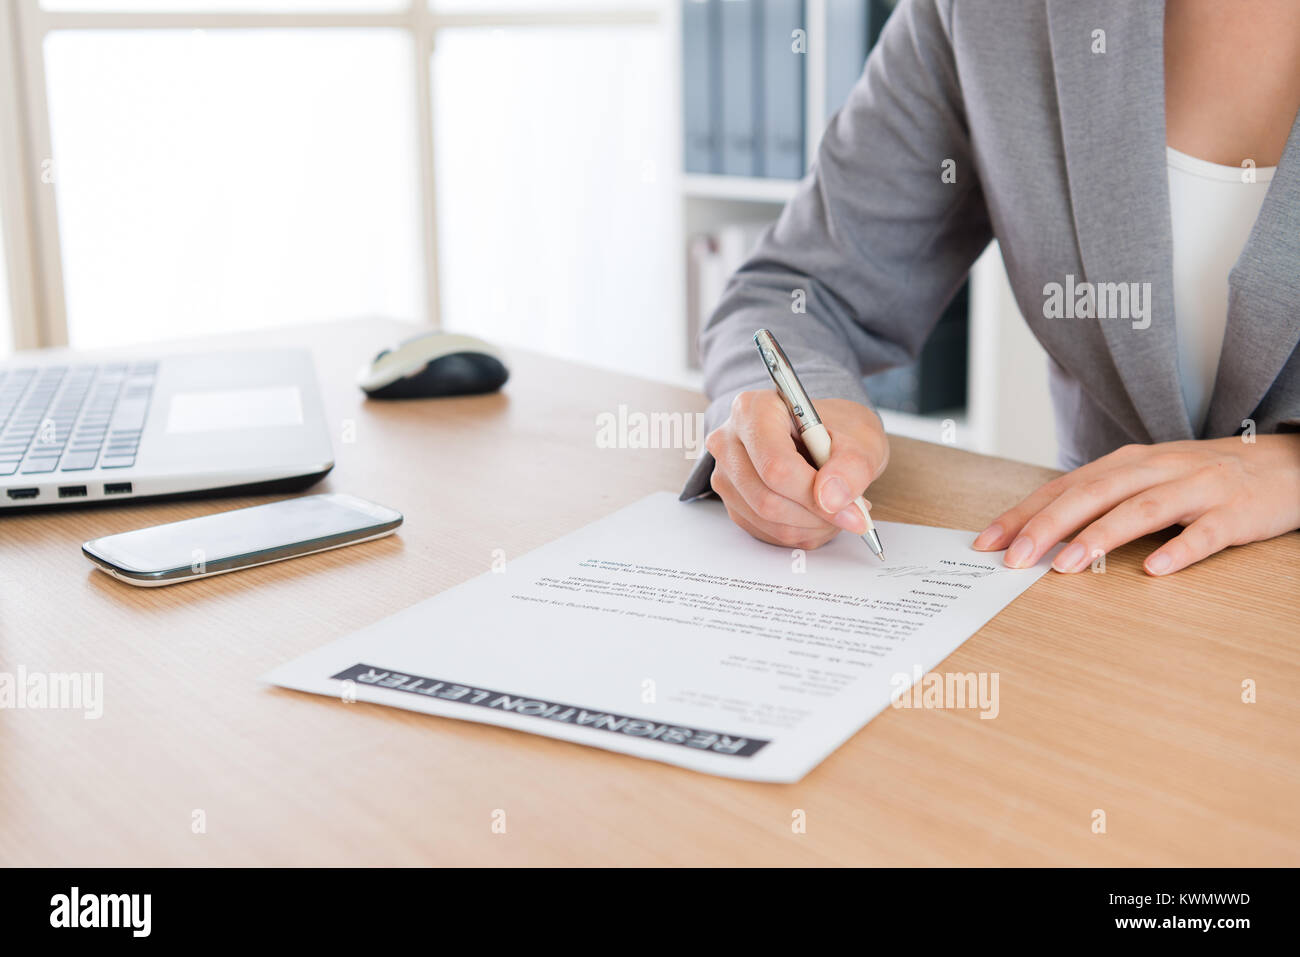 closeup of business woman decided retired from company and writing personal resignation letter explaining plan in future to application leaving. Stock Photo